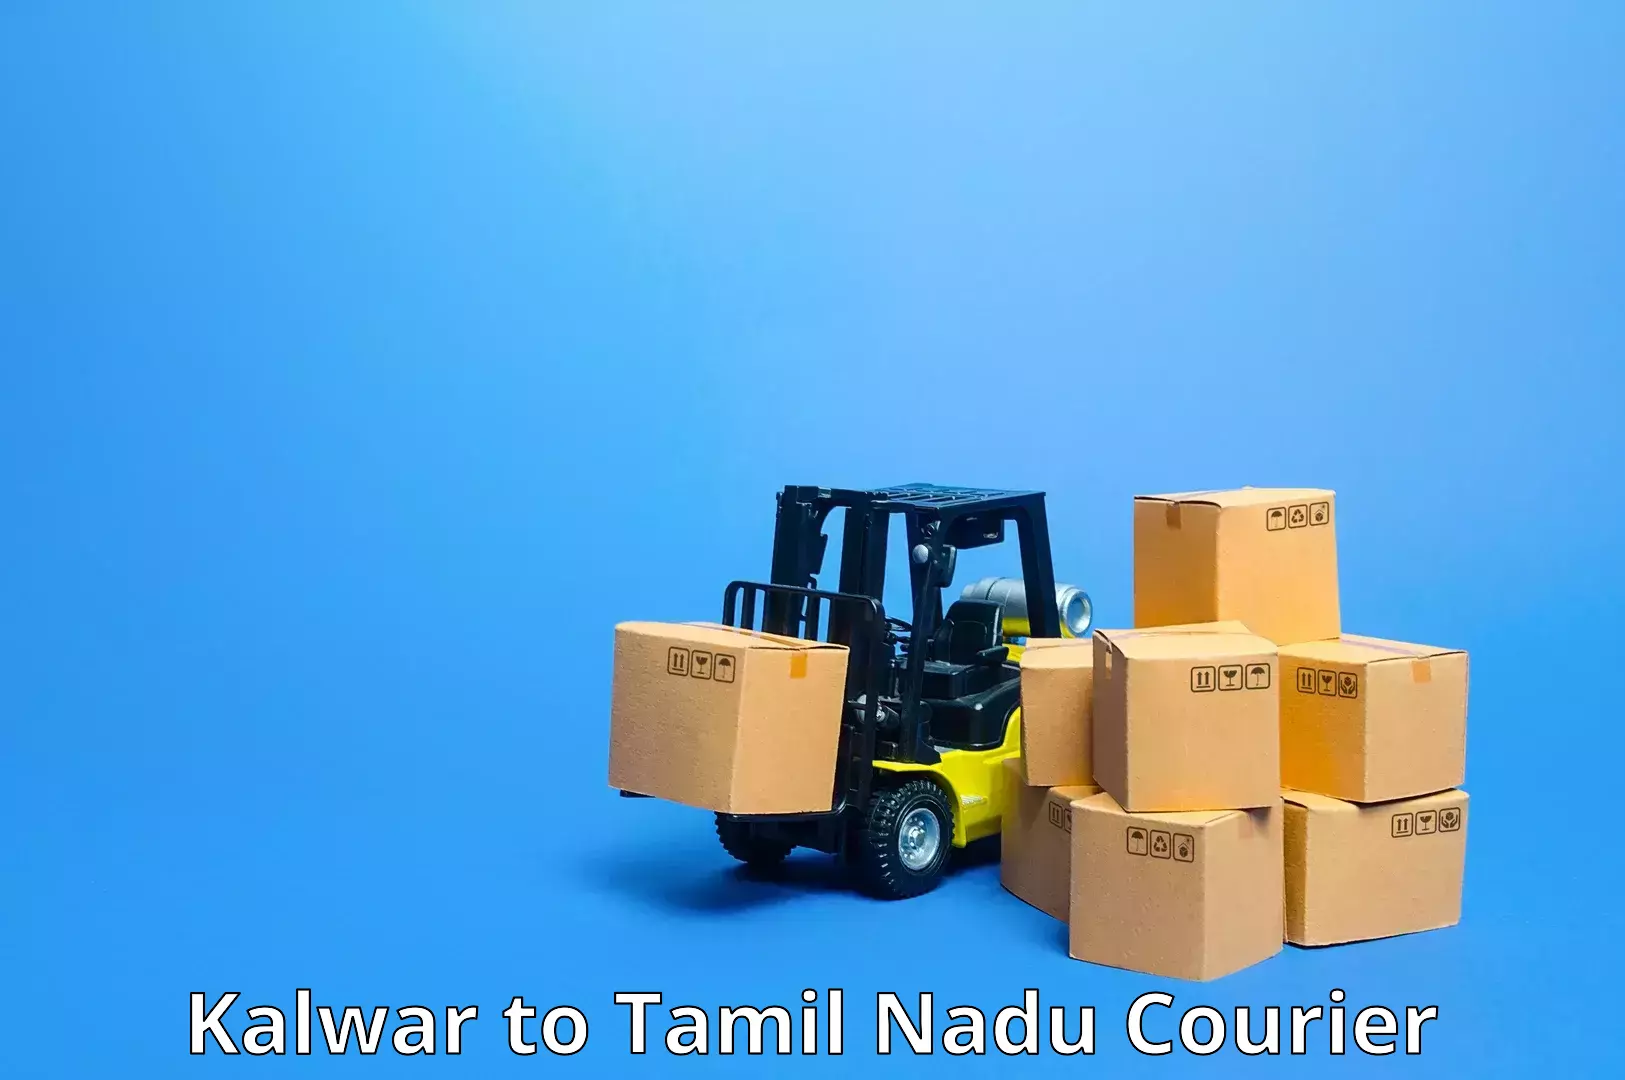 End-to-end delivery Kalwar to Chennai Port